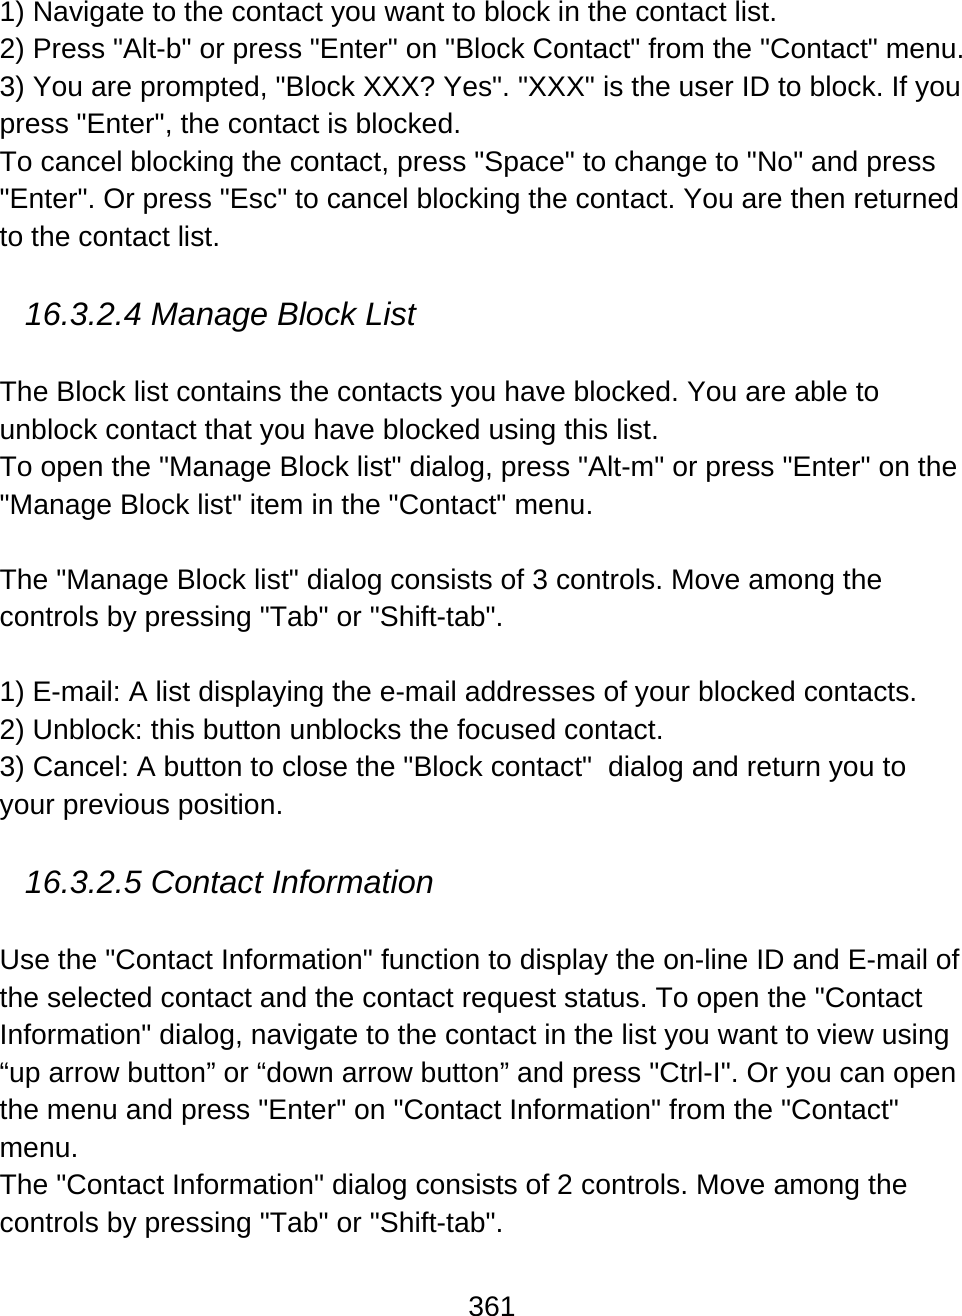 361  1) Navigate to the contact you want to block in the contact list.  2) Press &quot;Alt-b&quot; or press &quot;Enter&quot; on &quot;Block Contact&quot; from the &quot;Contact&quot; menu.  3) You are prompted, &quot;Block XXX? Yes&quot;. &quot;XXX&quot; is the user ID to block. If you press &quot;Enter&quot;, the contact is blocked.  To cancel blocking the contact, press &quot;Space&quot; to change to &quot;No&quot; and press &quot;Enter&quot;. Or press &quot;Esc&quot; to cancel blocking the contact. You are then returned to the contact list.  16.3.2.4 Manage Block List  The Block list contains the contacts you have blocked. You are able to unblock contact that you have blocked using this list. To open the &quot;Manage Block list&quot; dialog, press &quot;Alt-m&quot; or press &quot;Enter&quot; on the &quot;Manage Block list&quot; item in the &quot;Contact&quot; menu.    The &quot;Manage Block list&quot; dialog consists of 3 controls. Move among the controls by pressing &quot;Tab&quot; or &quot;Shift-tab&quot;.  1) E-mail: A list displaying the e-mail addresses of your blocked contacts.  2) Unblock: this button unblocks the focused contact.  3) Cancel: A button to close the &quot;Block contact&quot;  dialog and return you to your previous position.  16.3.2.5 Contact Information  Use the &quot;Contact Information&quot; function to display the on-line ID and E-mail of the selected contact and the contact request status. To open the &quot;Contact Information&quot; dialog, navigate to the contact in the list you want to view using “up arrow button” or “down arrow button” and press &quot;Ctrl-I&quot;. Or you can open the menu and press &quot;Enter&quot; on &quot;Contact Information&quot; from the &quot;Contact&quot; menu.  The &quot;Contact Information&quot; dialog consists of 2 controls. Move among the controls by pressing &quot;Tab&quot; or &quot;Shift-tab&quot;.  